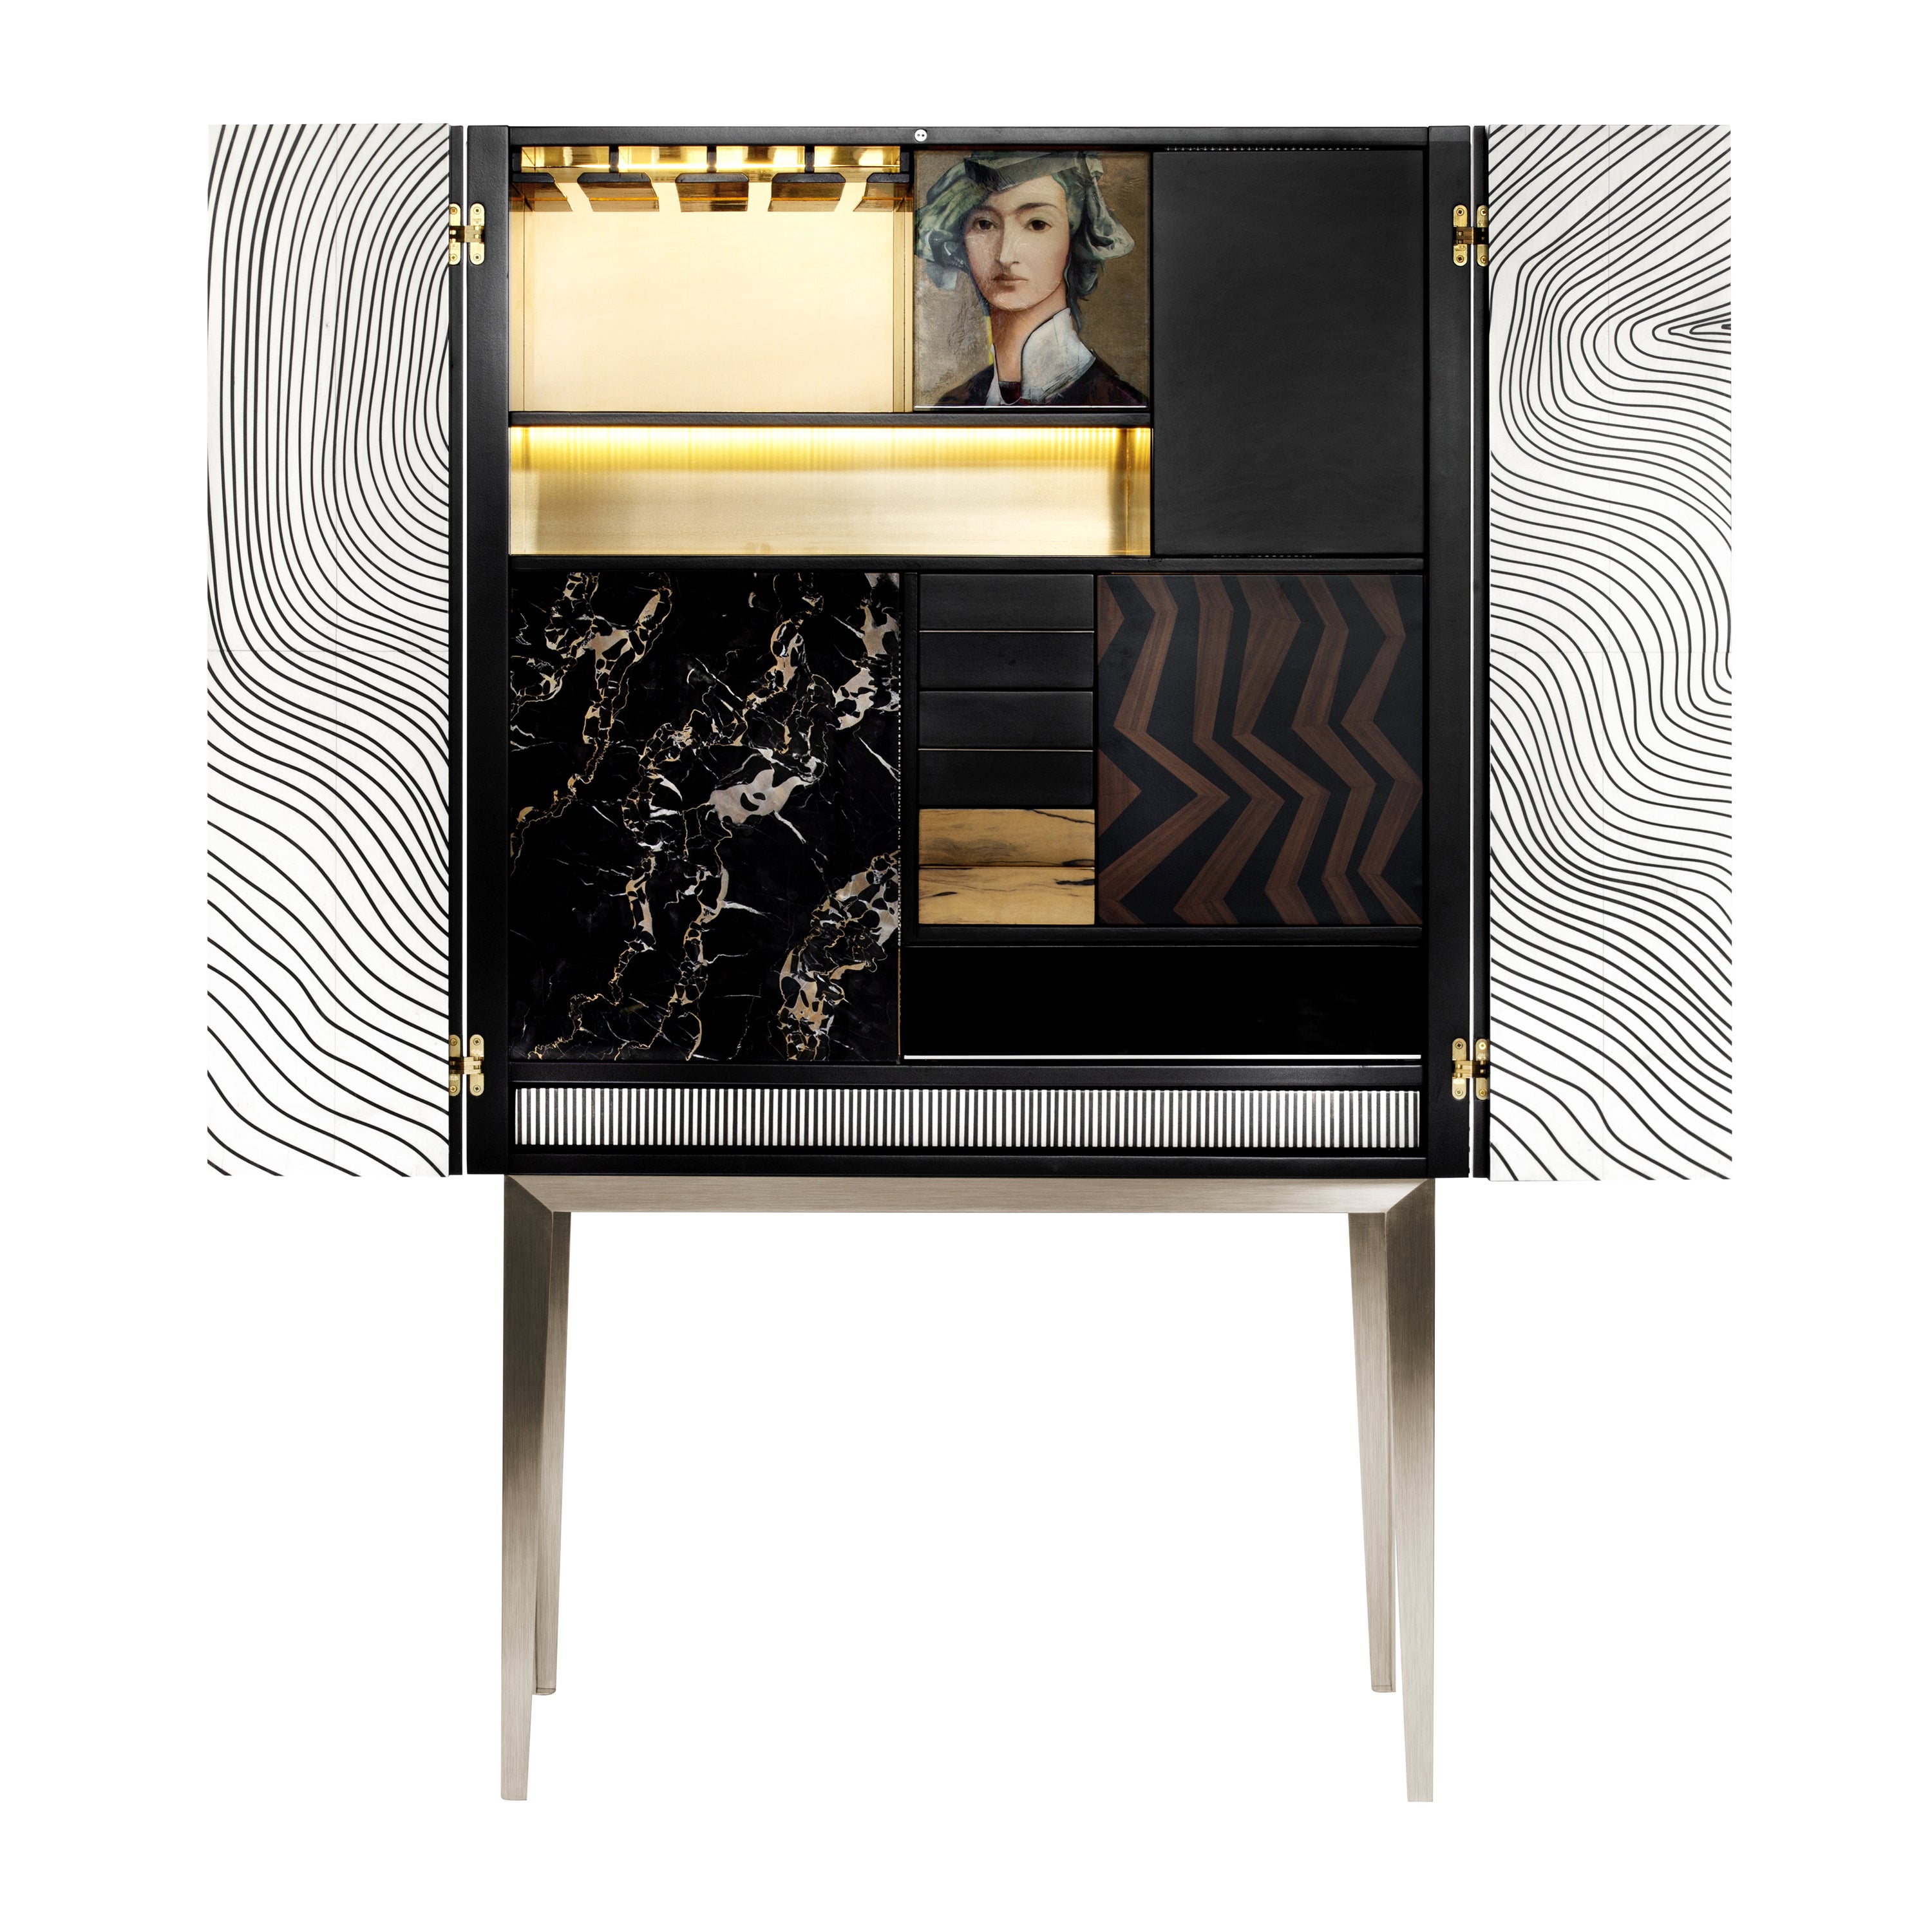 21st Century Majord’home Bar Cabinet, Maple and Ebony Inlays, Made in Italy